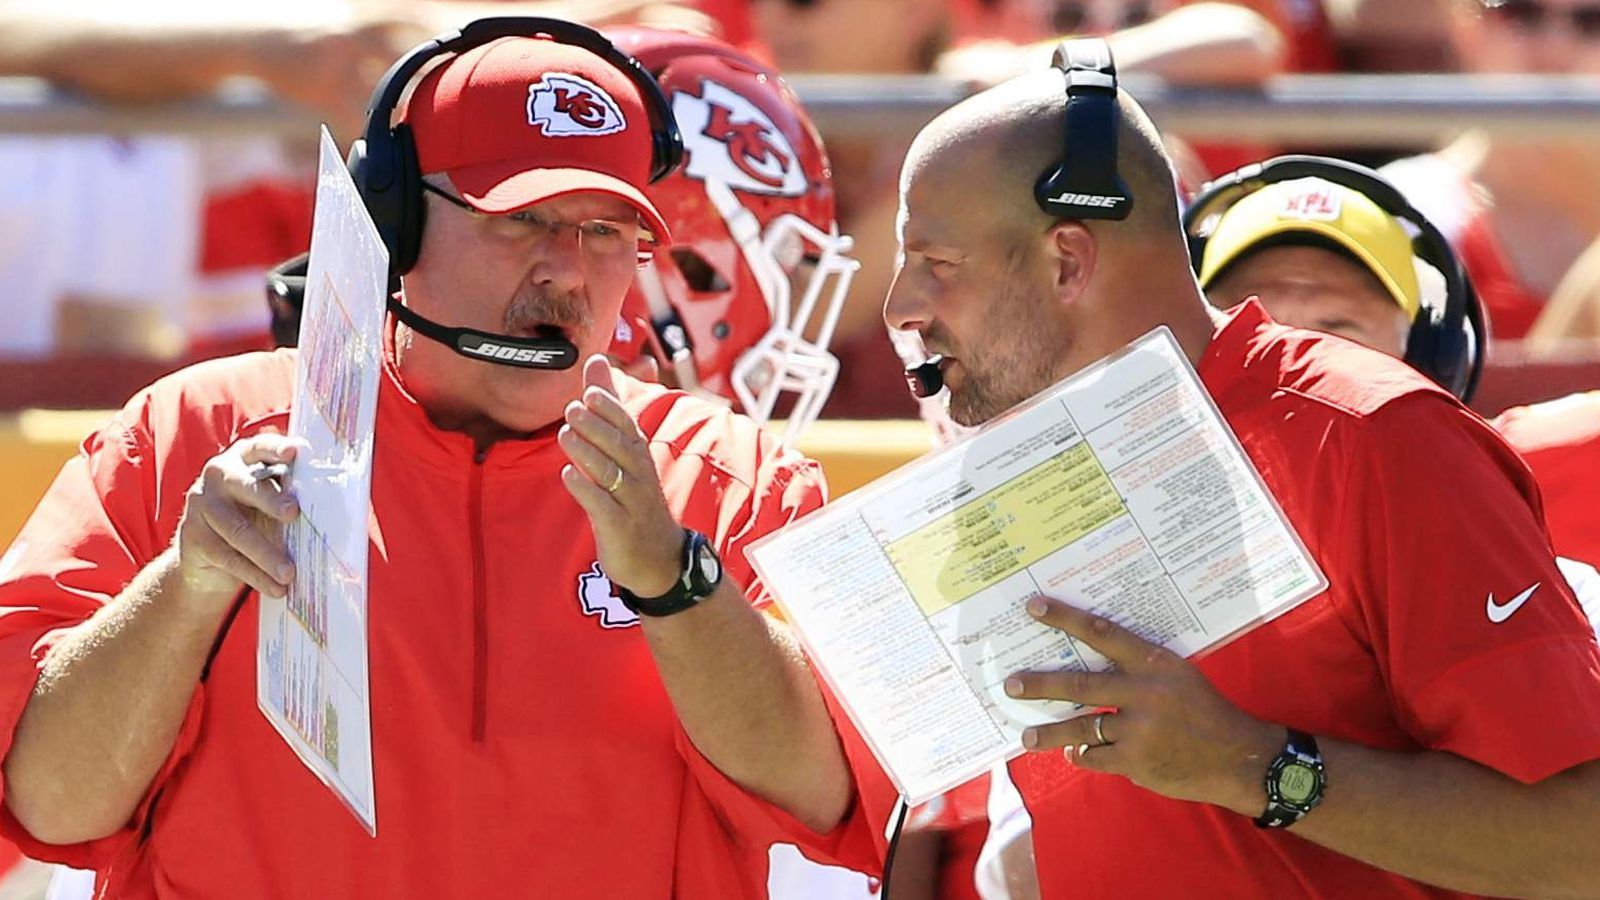 Branching out: A look at Andy Reid's coaching tree